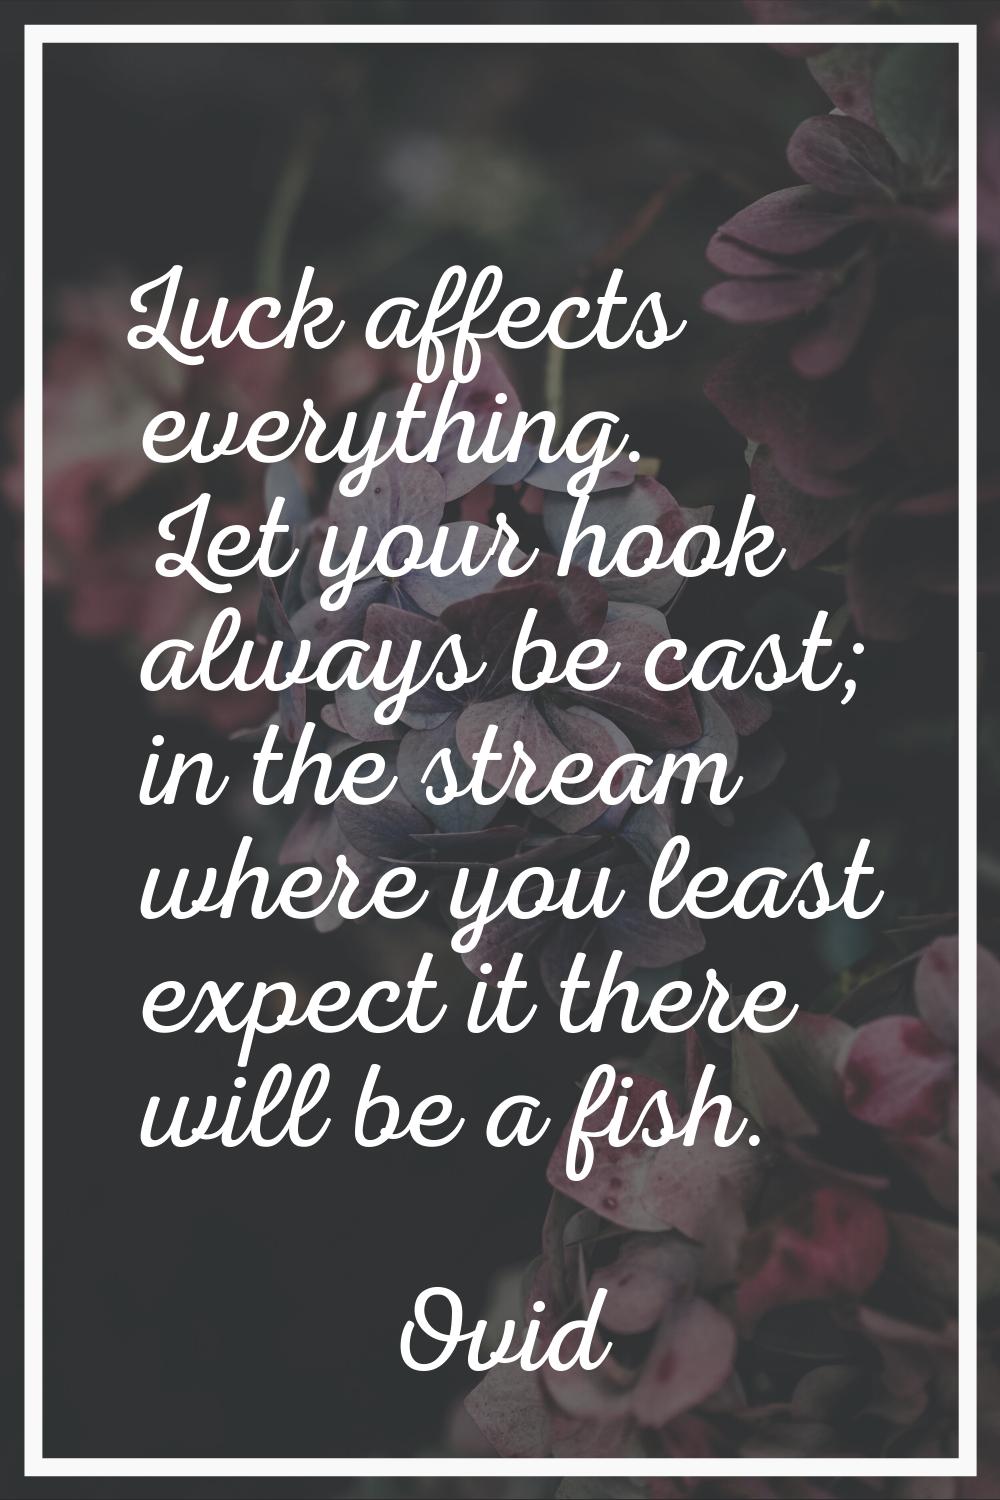 Luck affects everything. Let your hook always be cast; in the stream where you least expect it ther